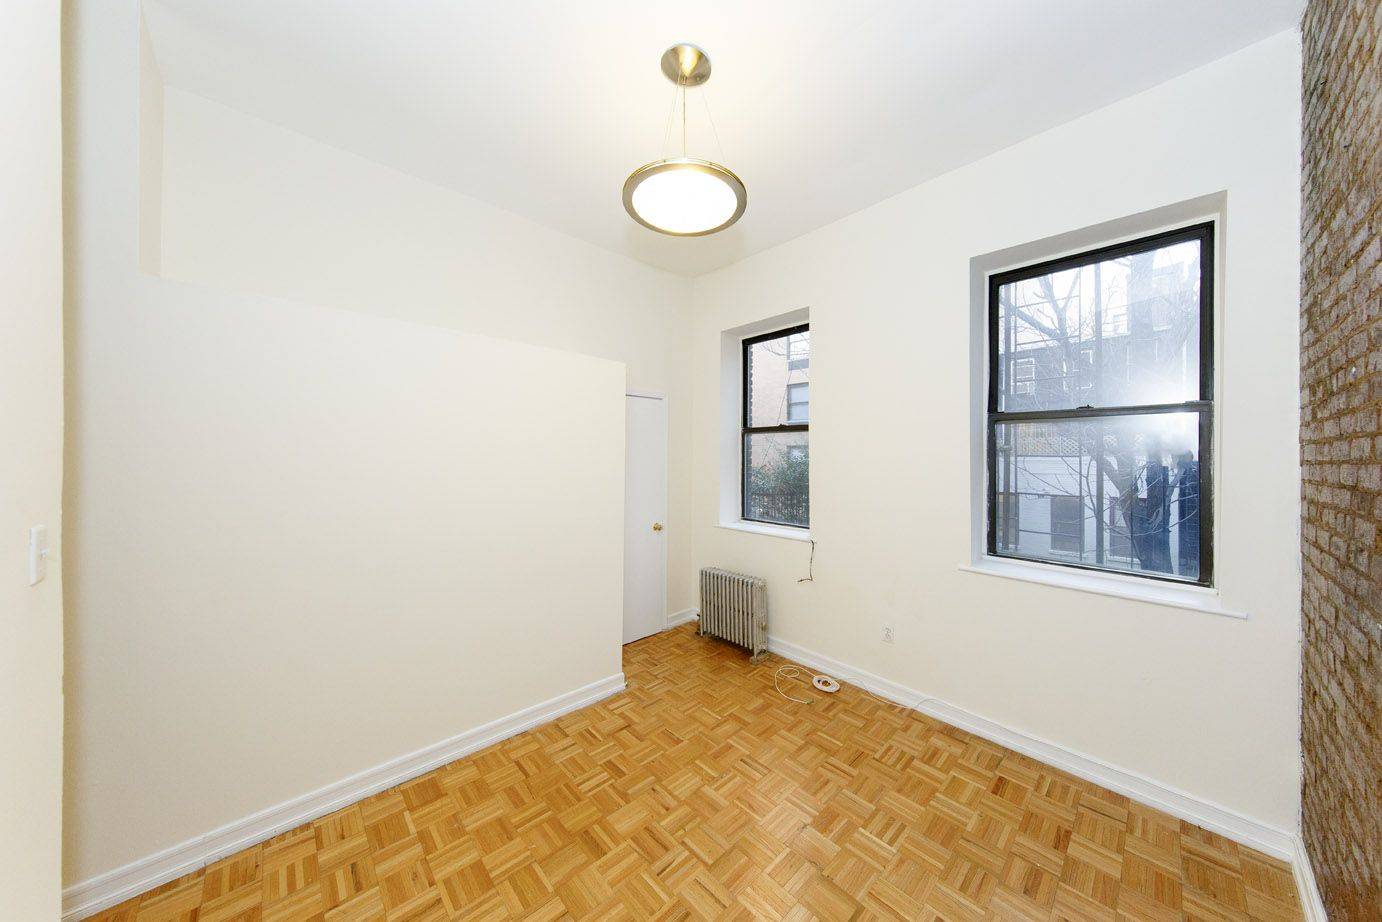 Brand New 2 Bedroom/1 Bathroom Apartment With A Private Patio In The East Village!